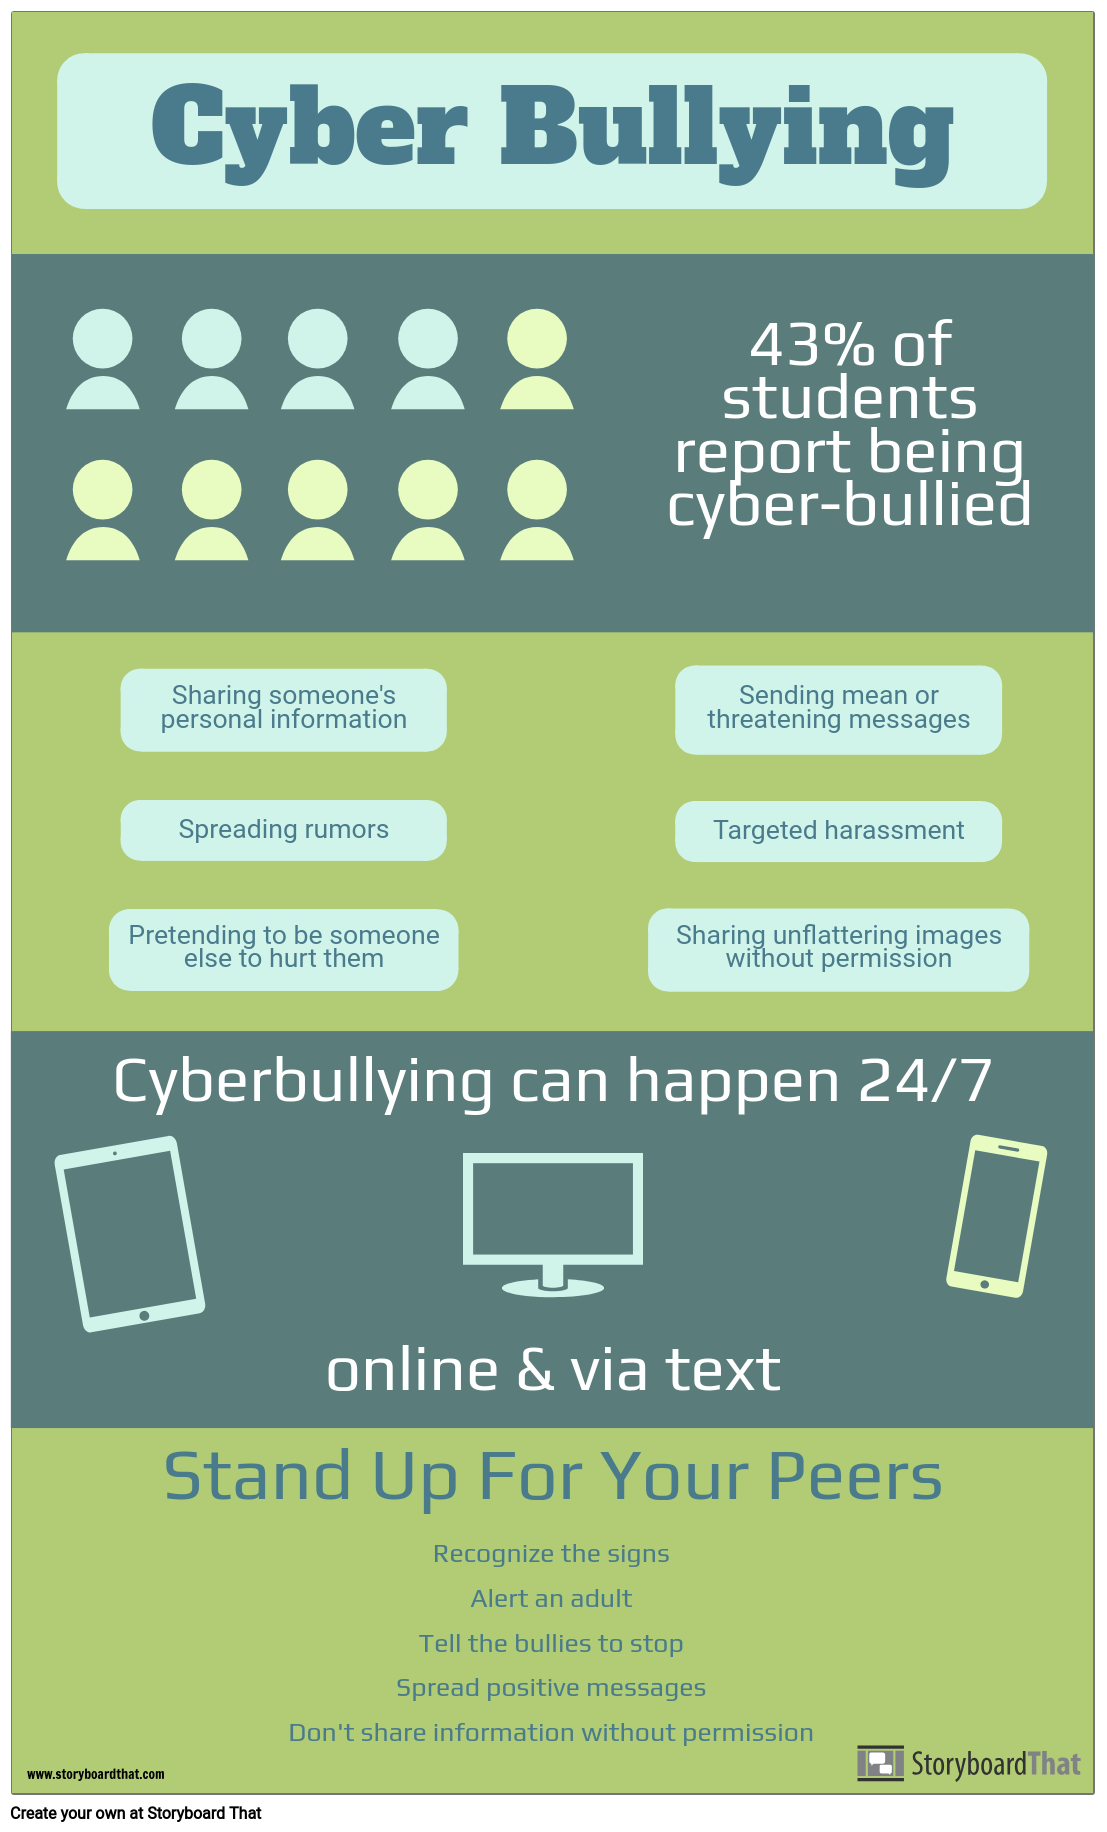 oral presentation about cyberbullying